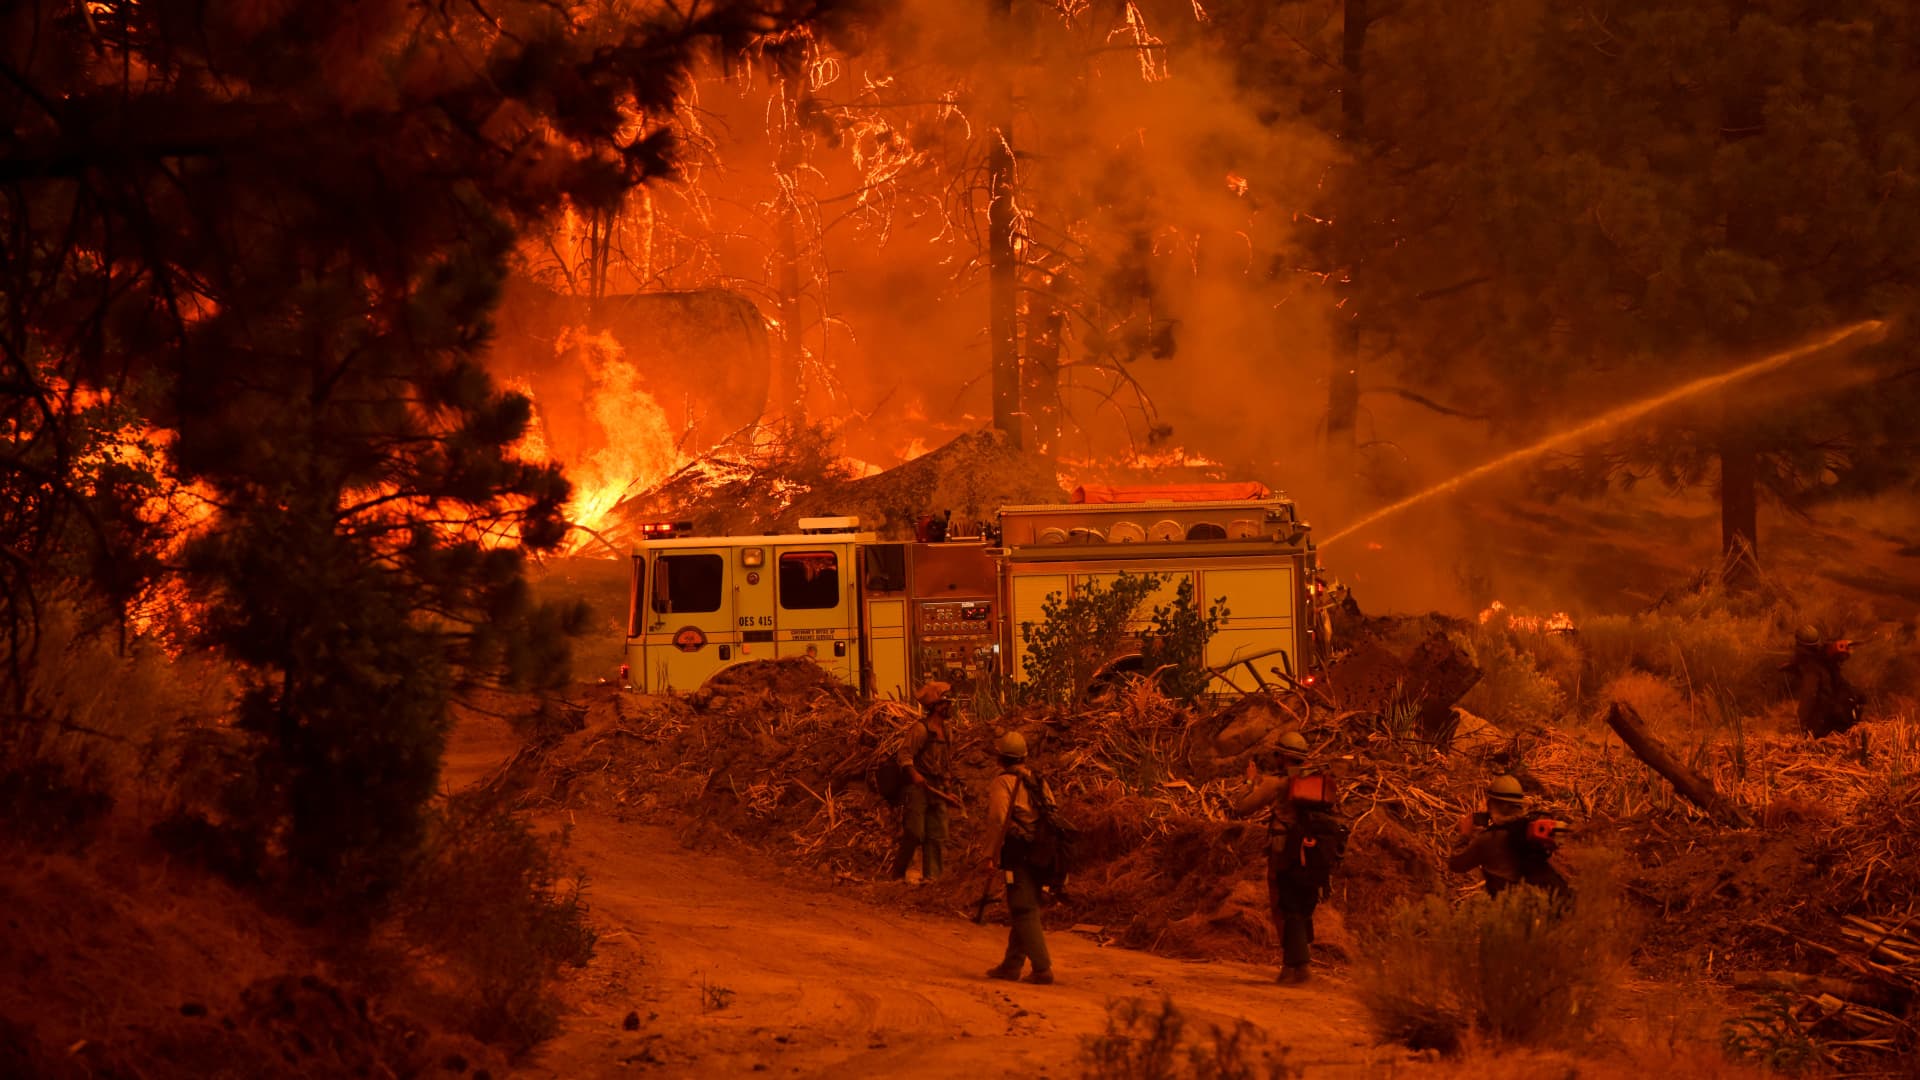 Firefighters work to control the Windy Fire as trees burn in the Sequoia National Forest near Johnsondale, California, on Sept. 22, 2021.